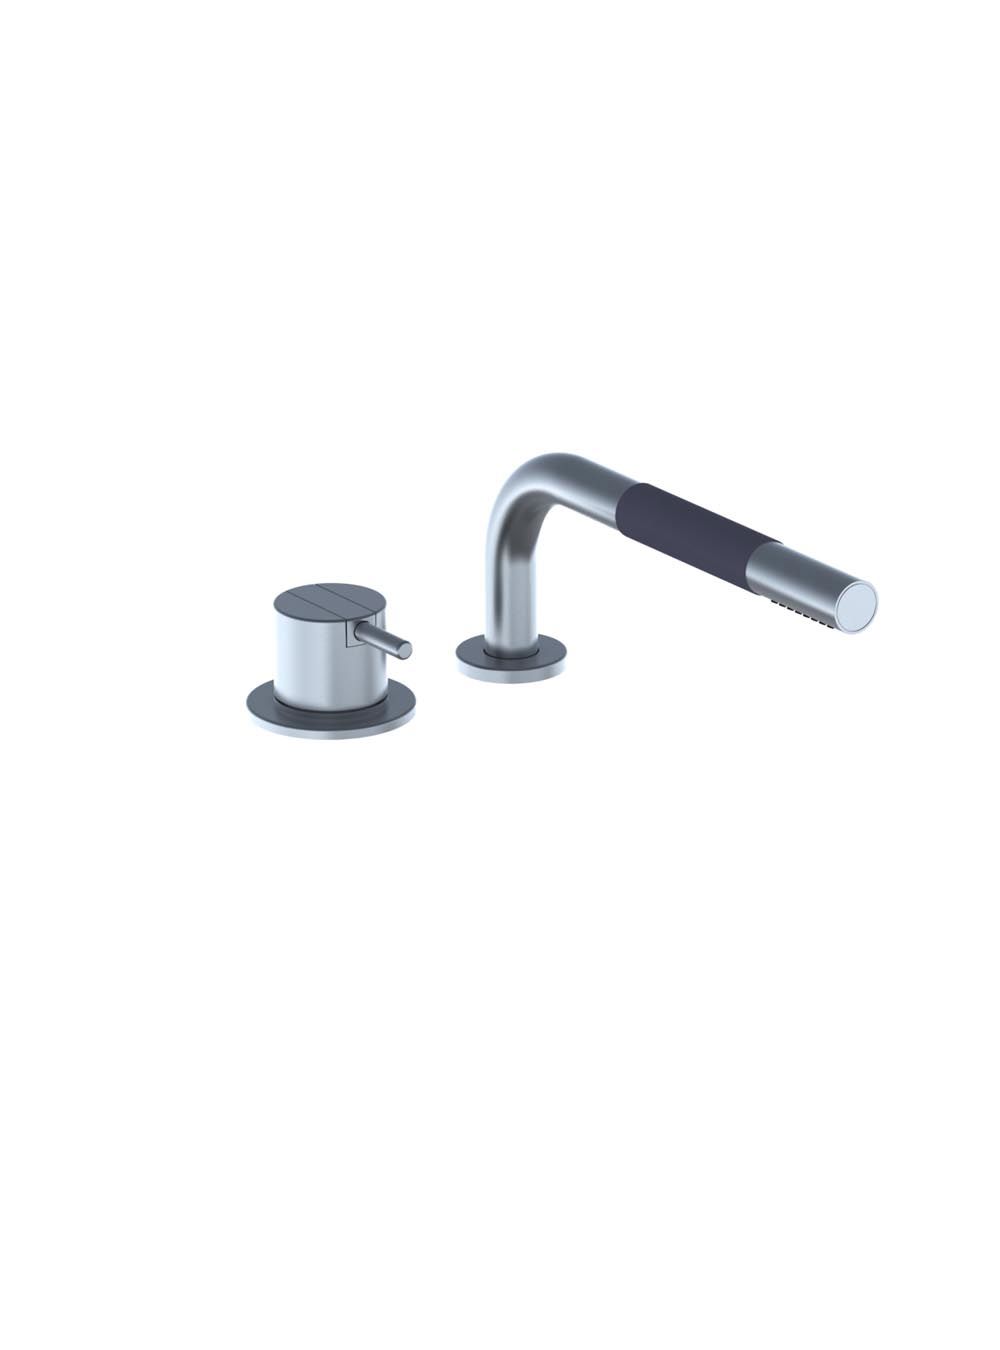 SC9: One-handle mixer 500 with hand shower T1.